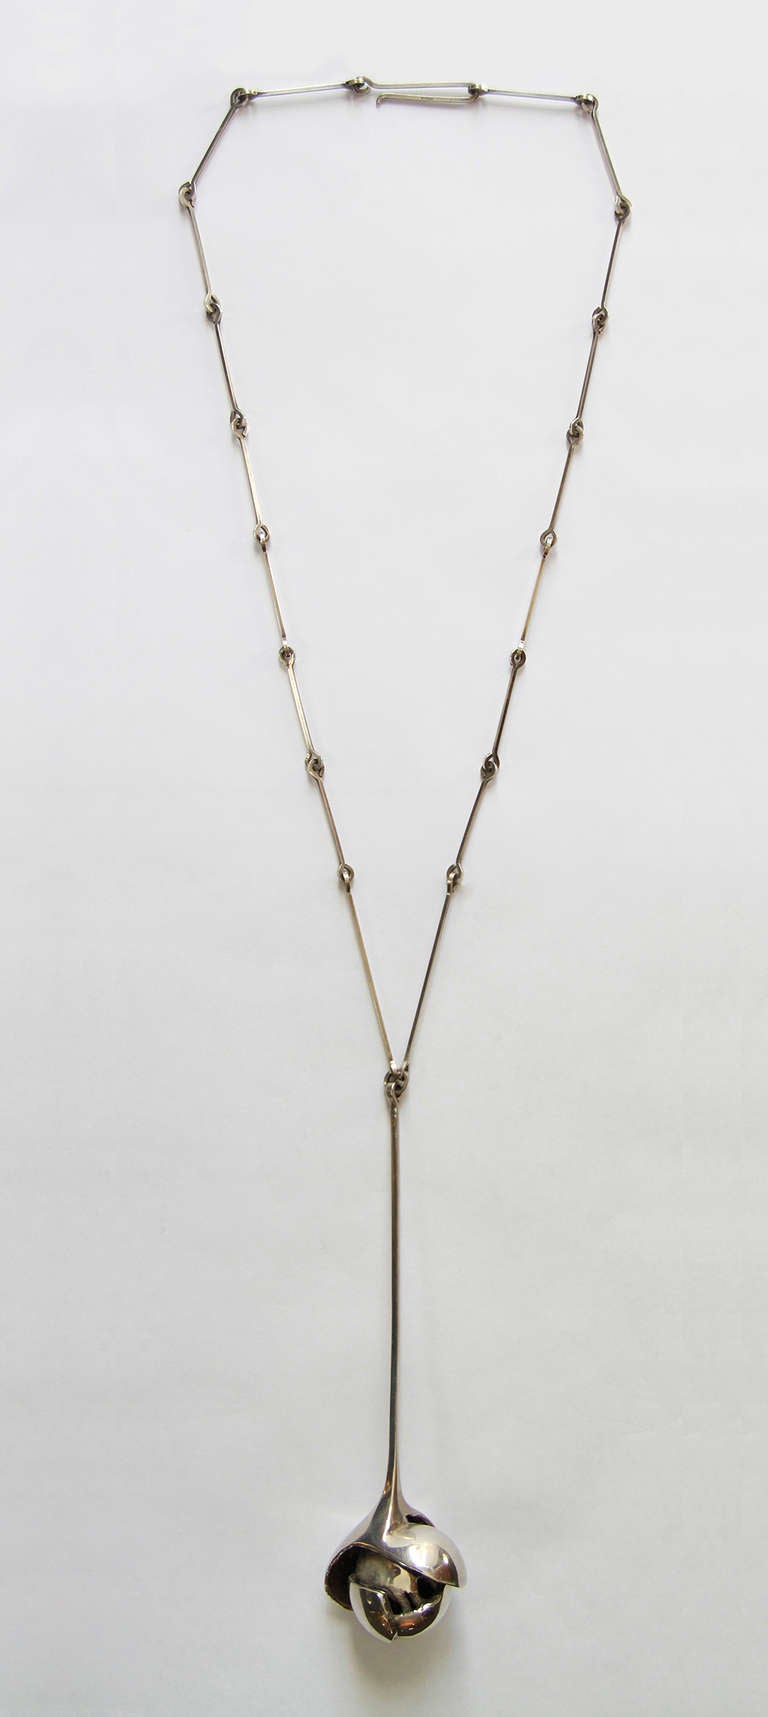 POUL HAVGAARD, born 1936 ( Denmark )

Sterling Silver Necklace Sculpture by Poul Havgaard for Lapponia, Finland Circa 1971-1972
Stamped 925H STERLING LAPPONIA FINLAND POUL
Weight 73g
21